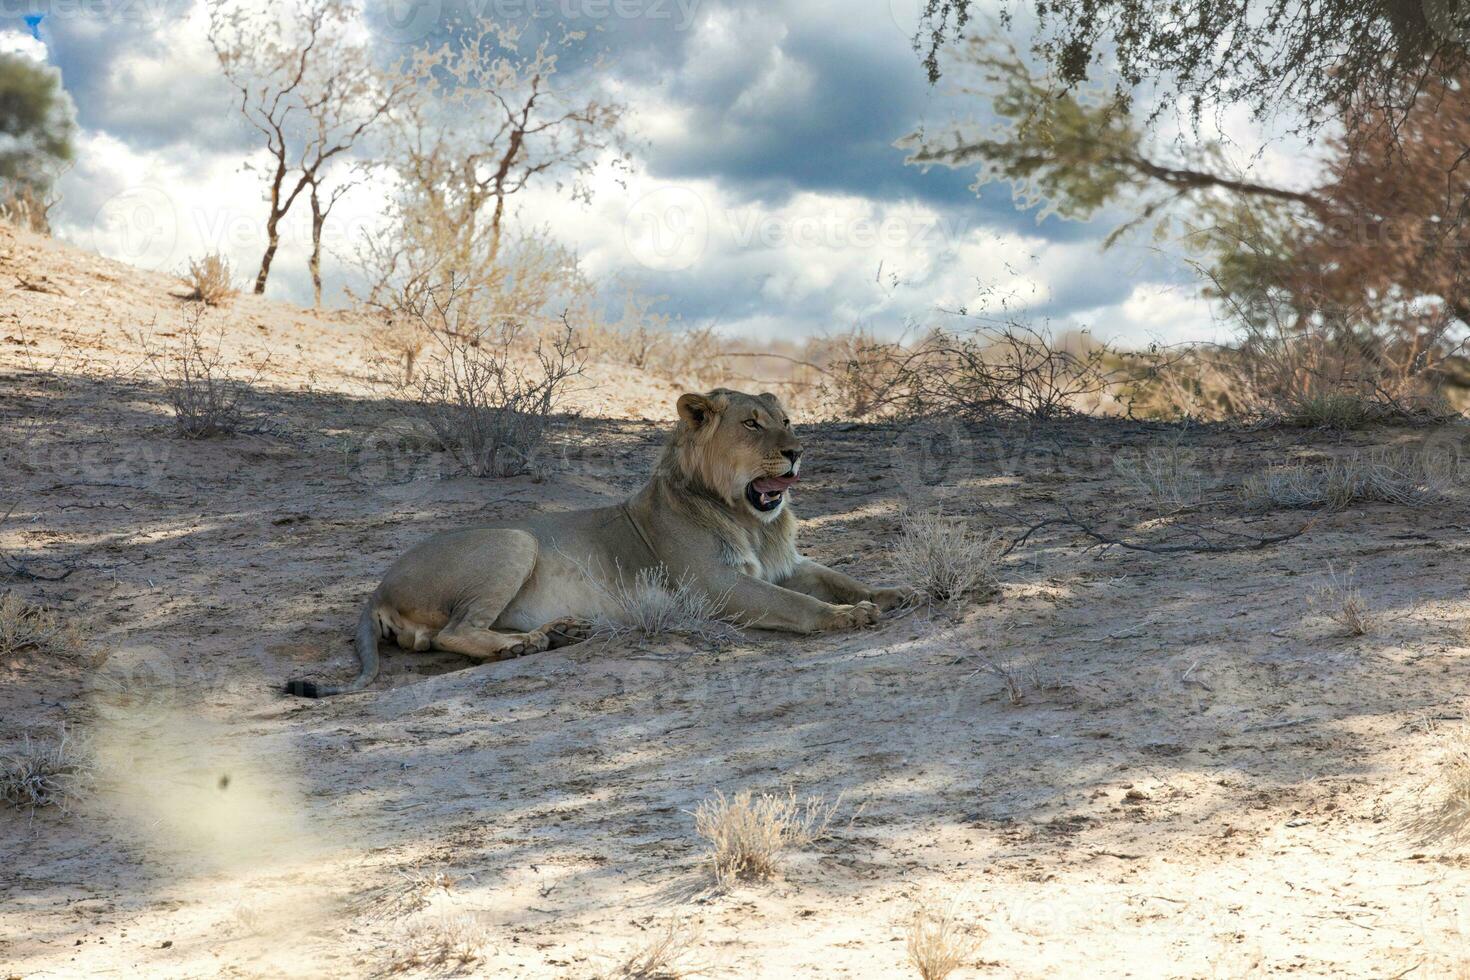 lion at kgalagadi transfrontier park, south africa photo